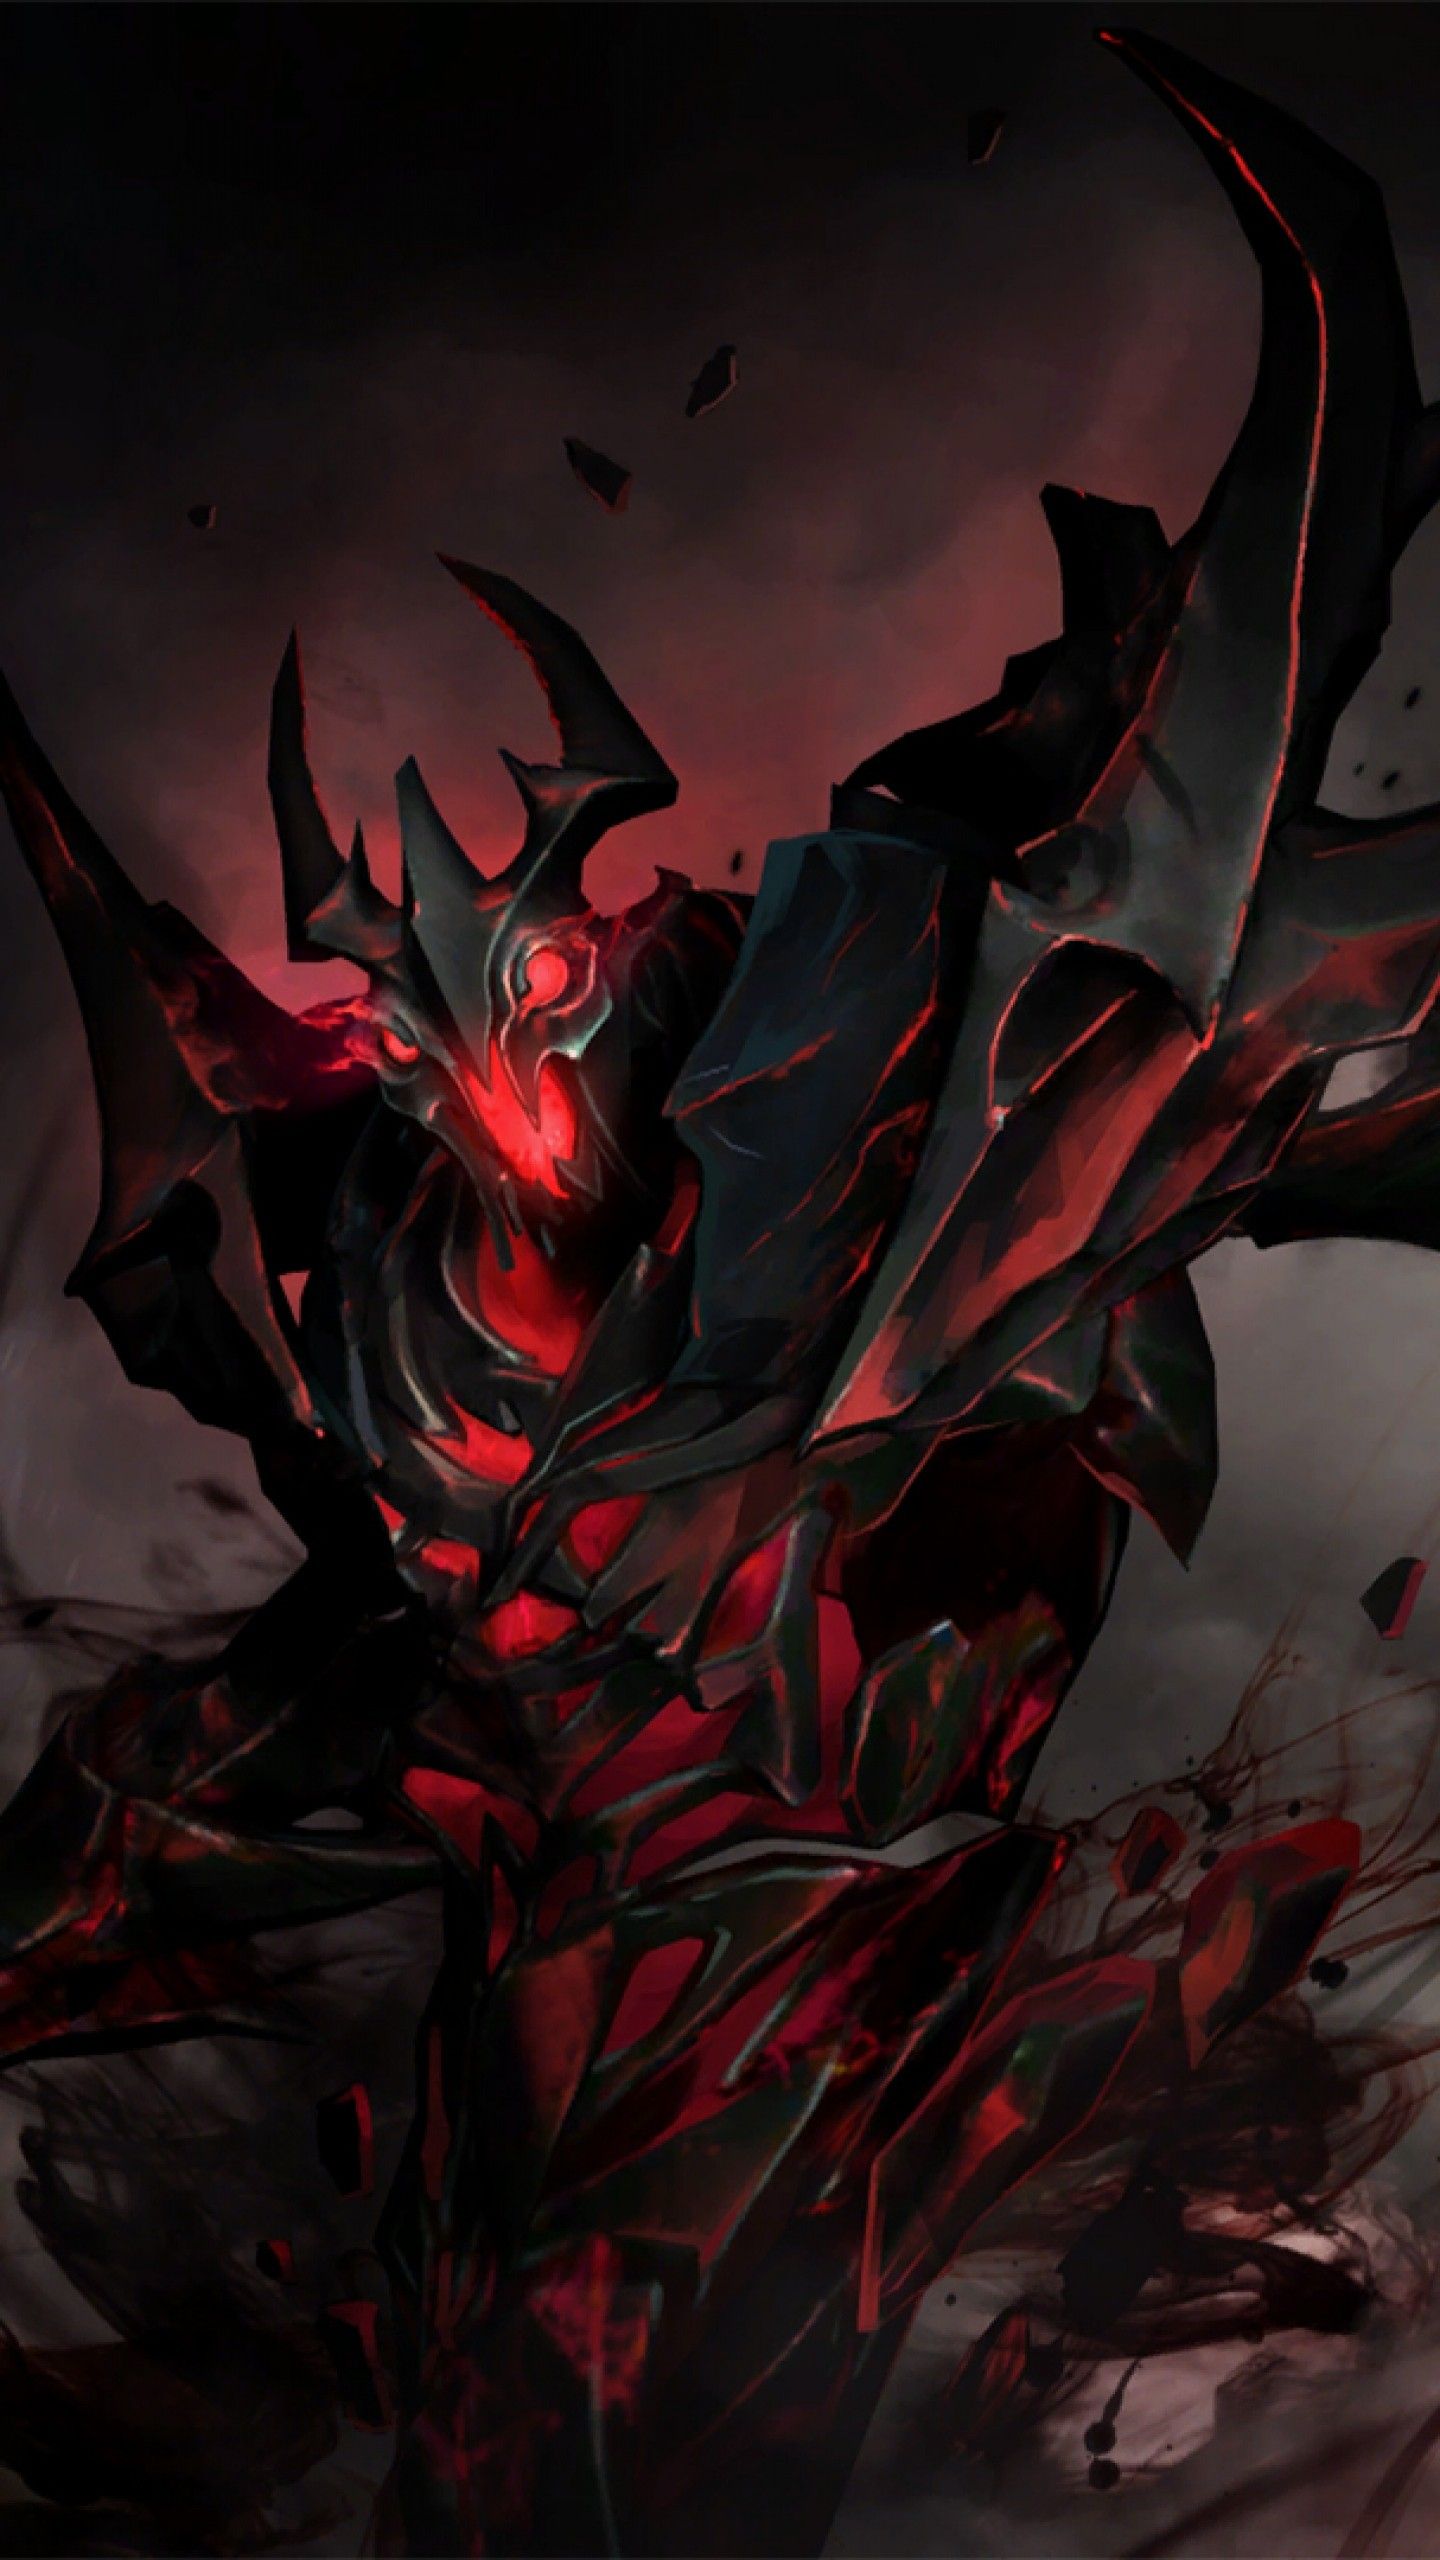 Rubick Dota 2 Wallpaper Android 2 Shadow Fiend